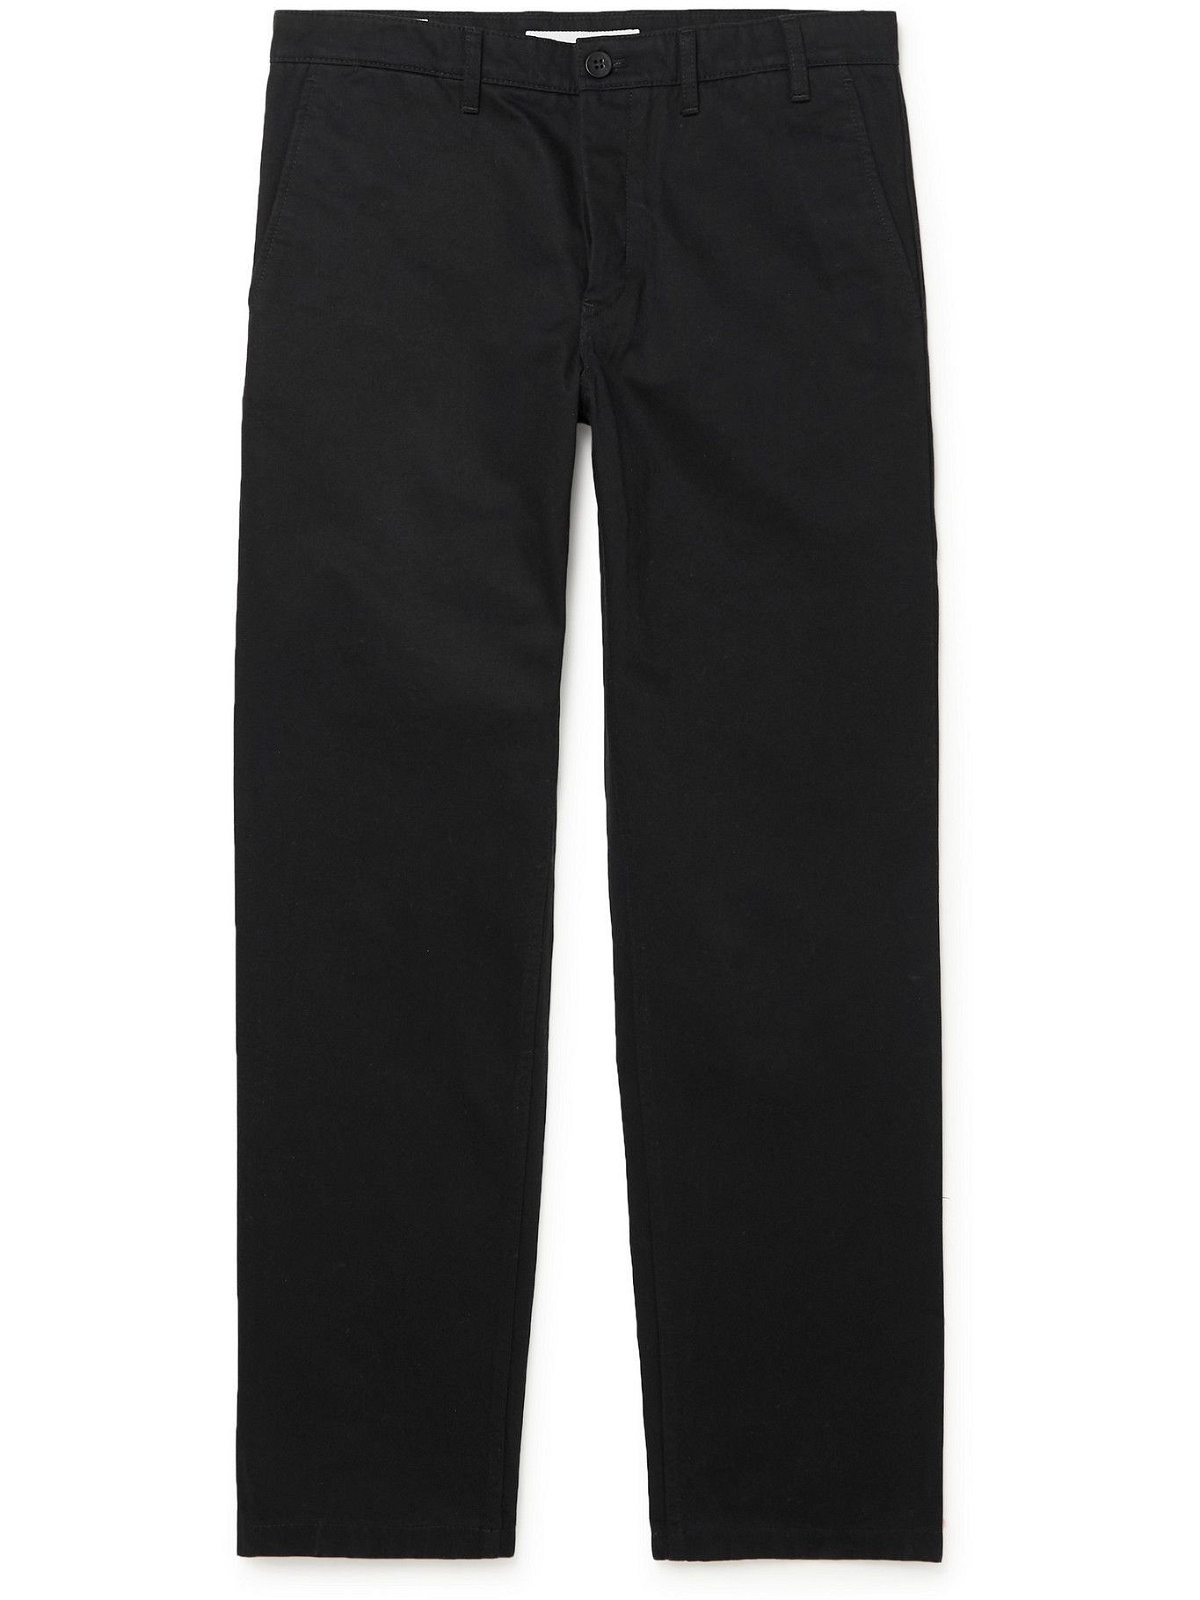 Photo: NORSE PROJECTS - Aros Cotton-Twill Chinos - Black